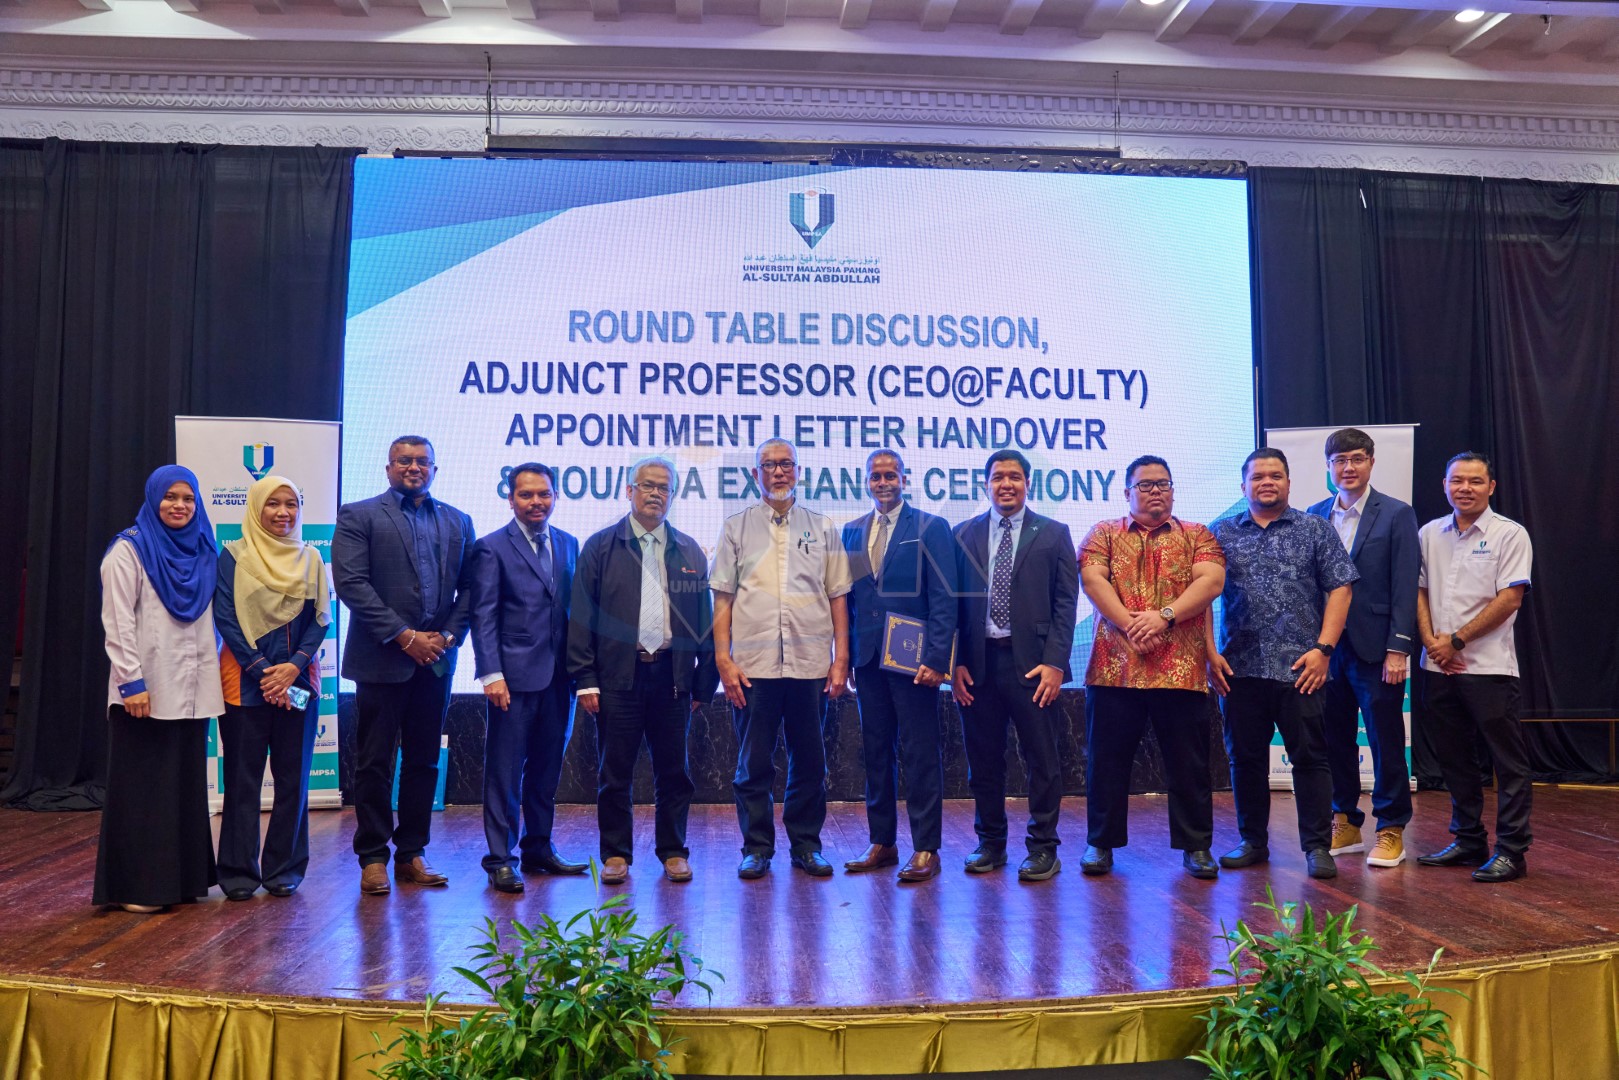 MoA/MoU Exchange Ceremony with Faculty of Computing Industry Partners